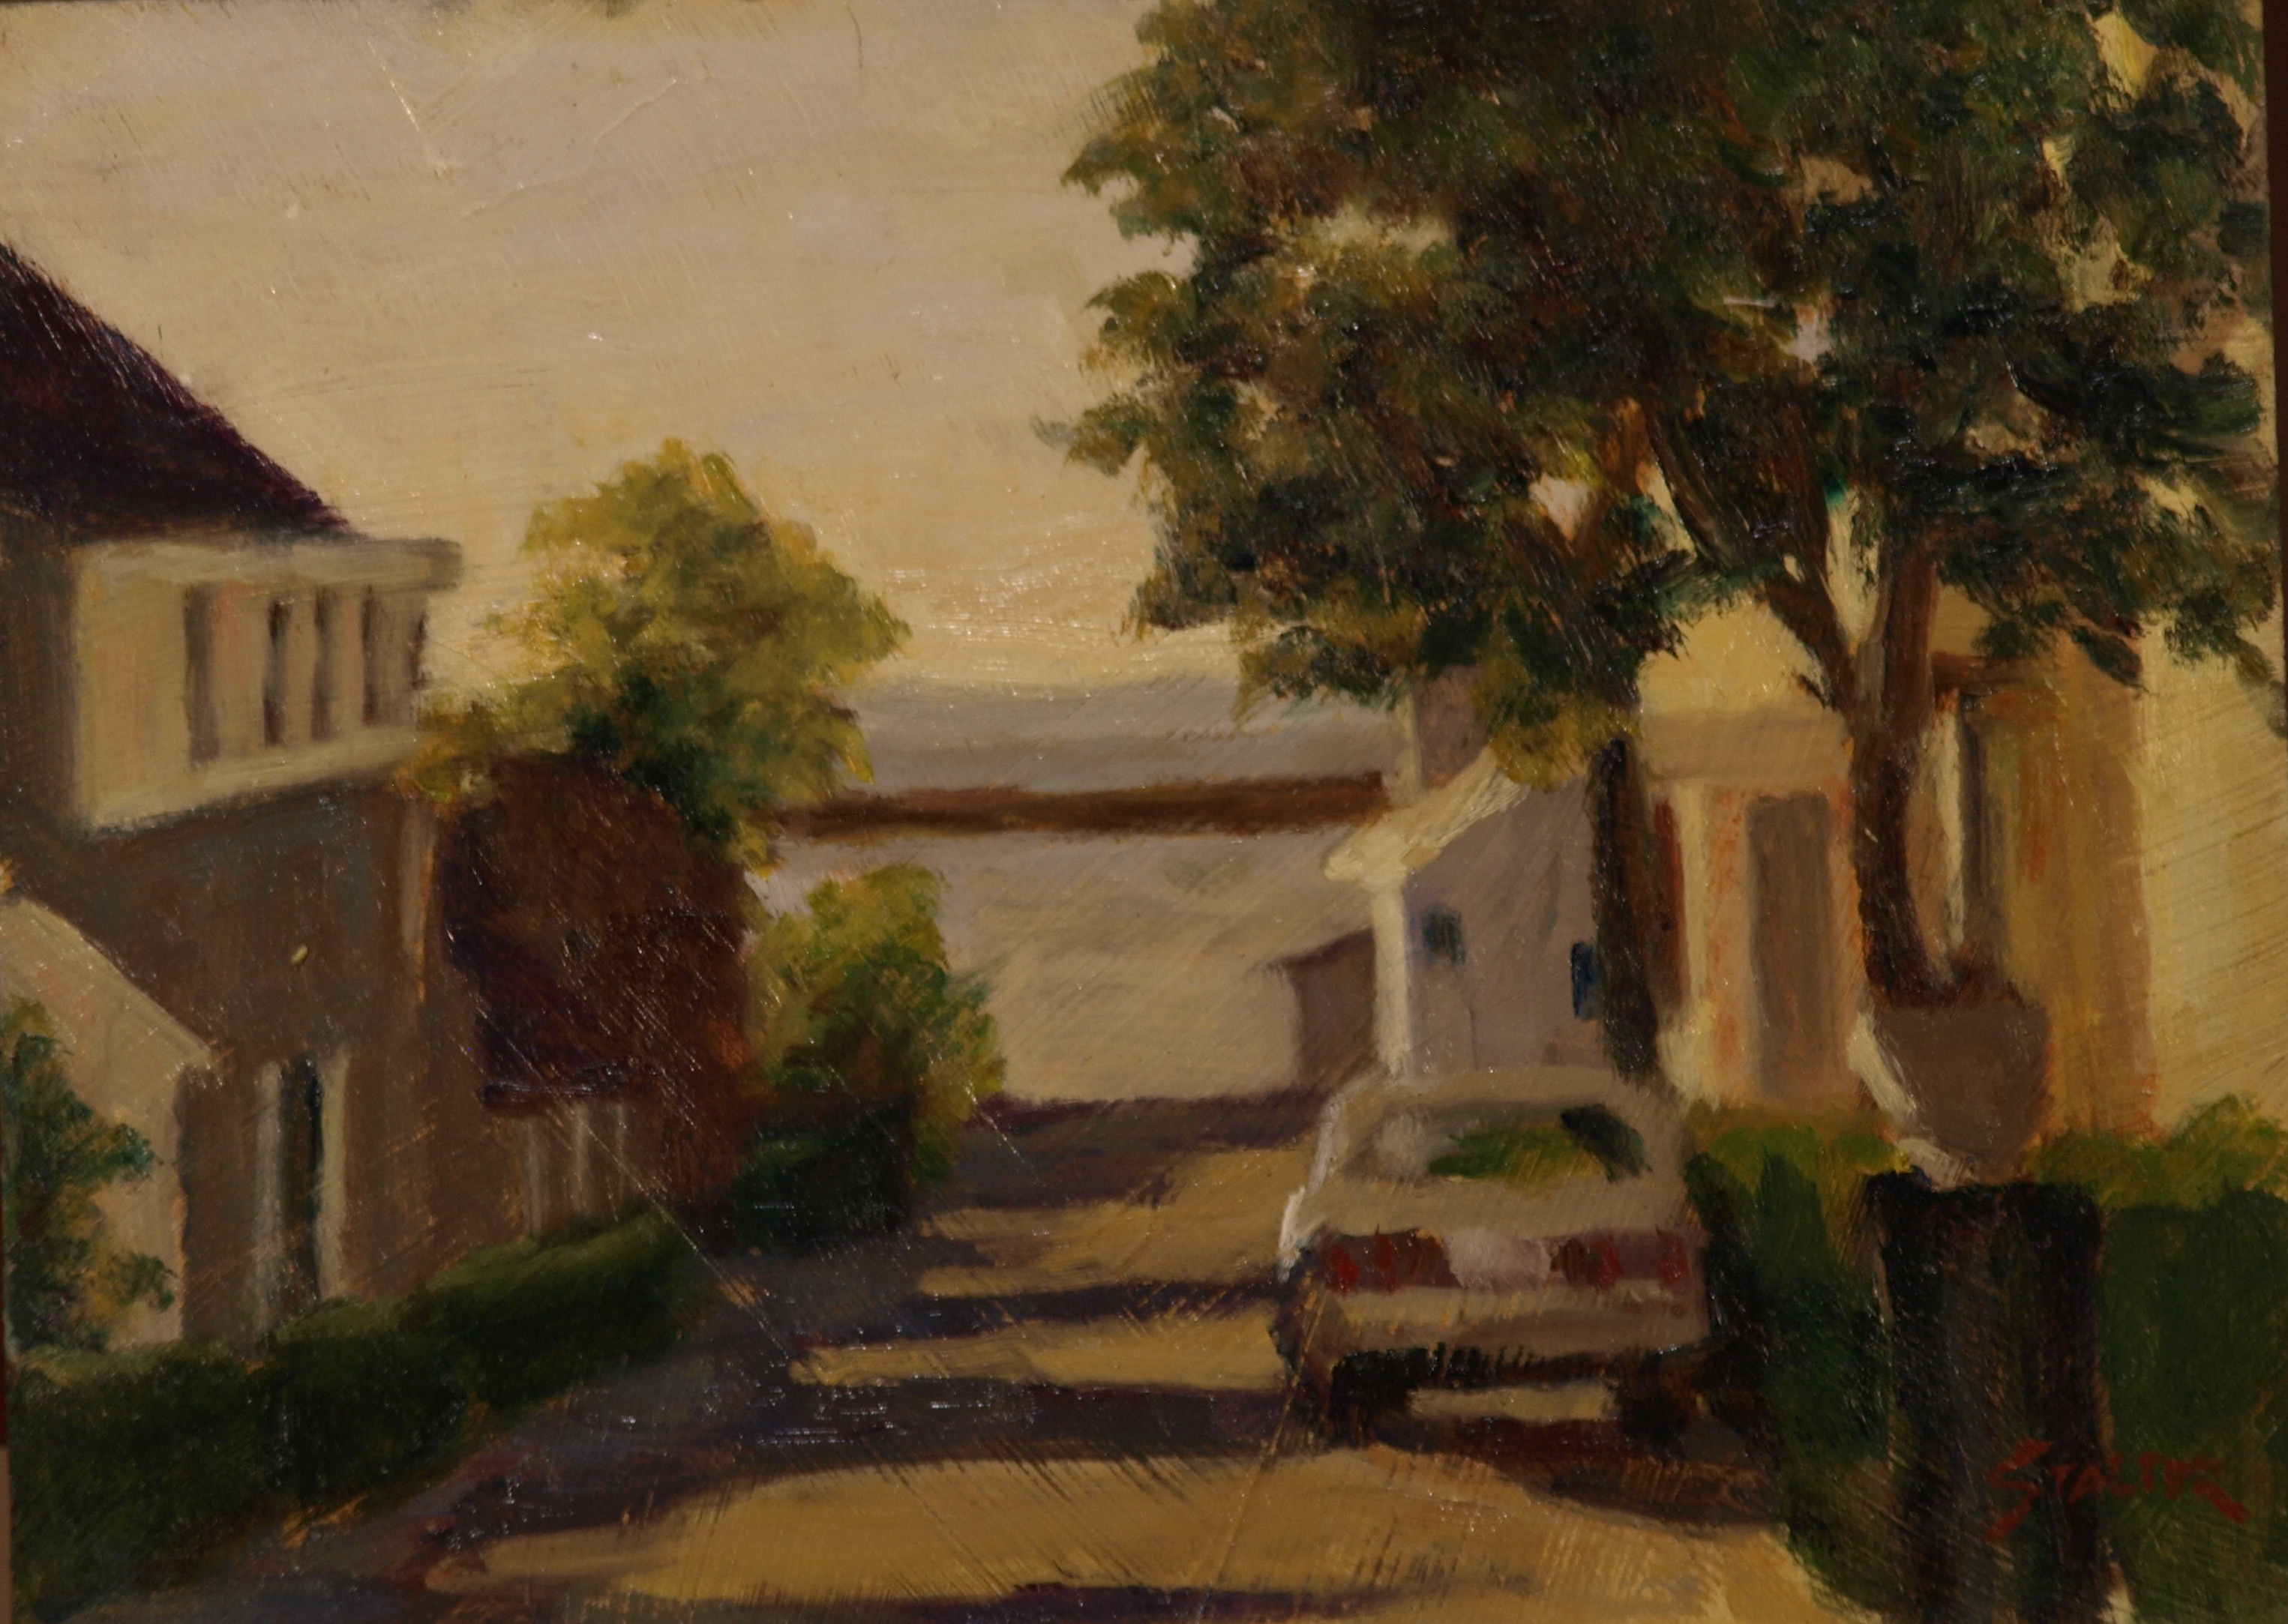 Provincetown Street, Oil on Panel, 9 x 12 Inches, by Richard Stalter, $225